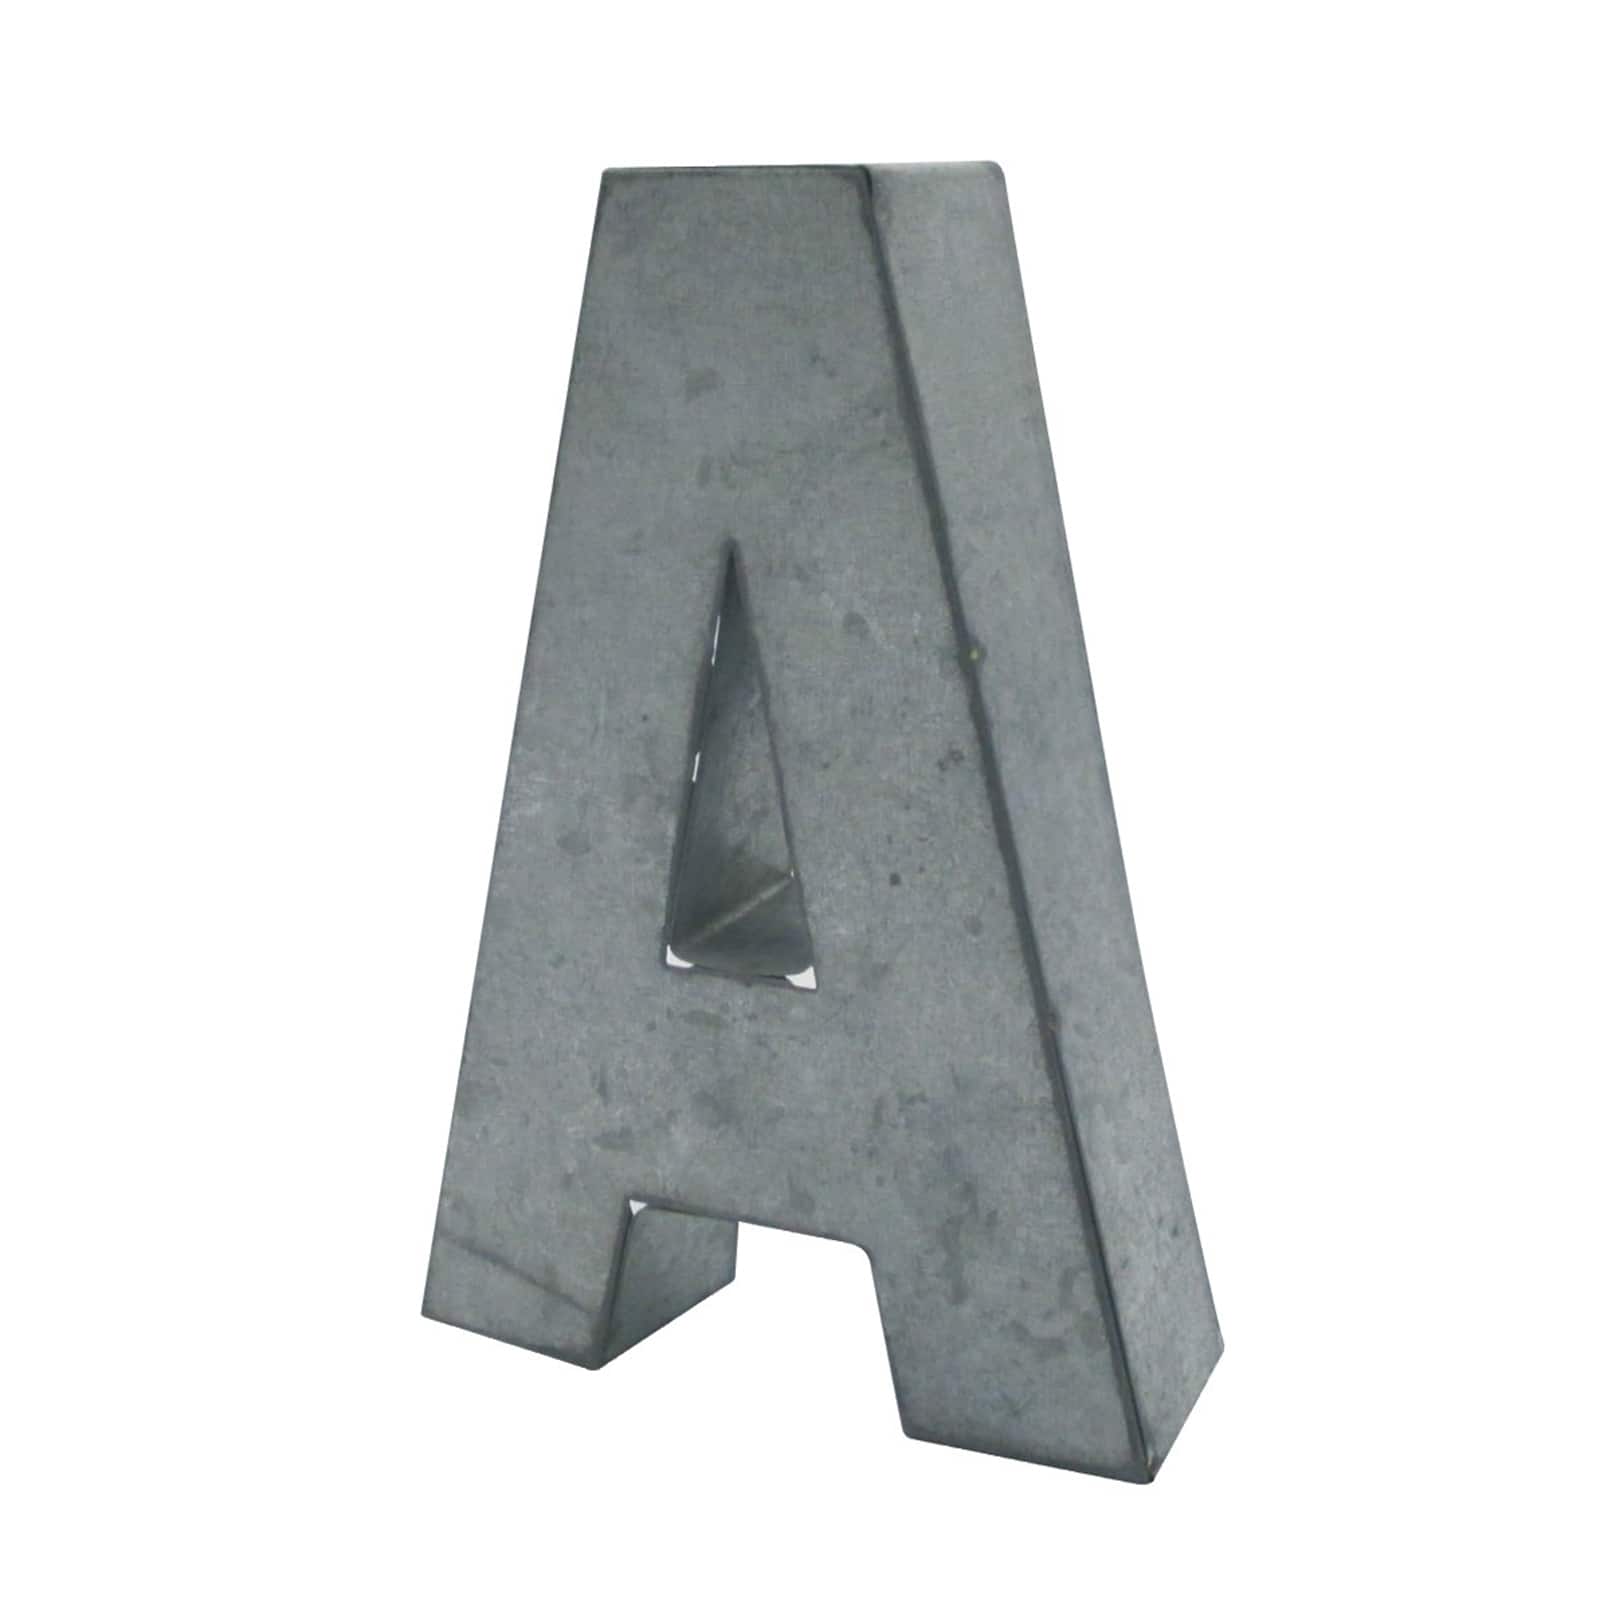 5.75 Galvanized 3D Letter by ArtMinds M 